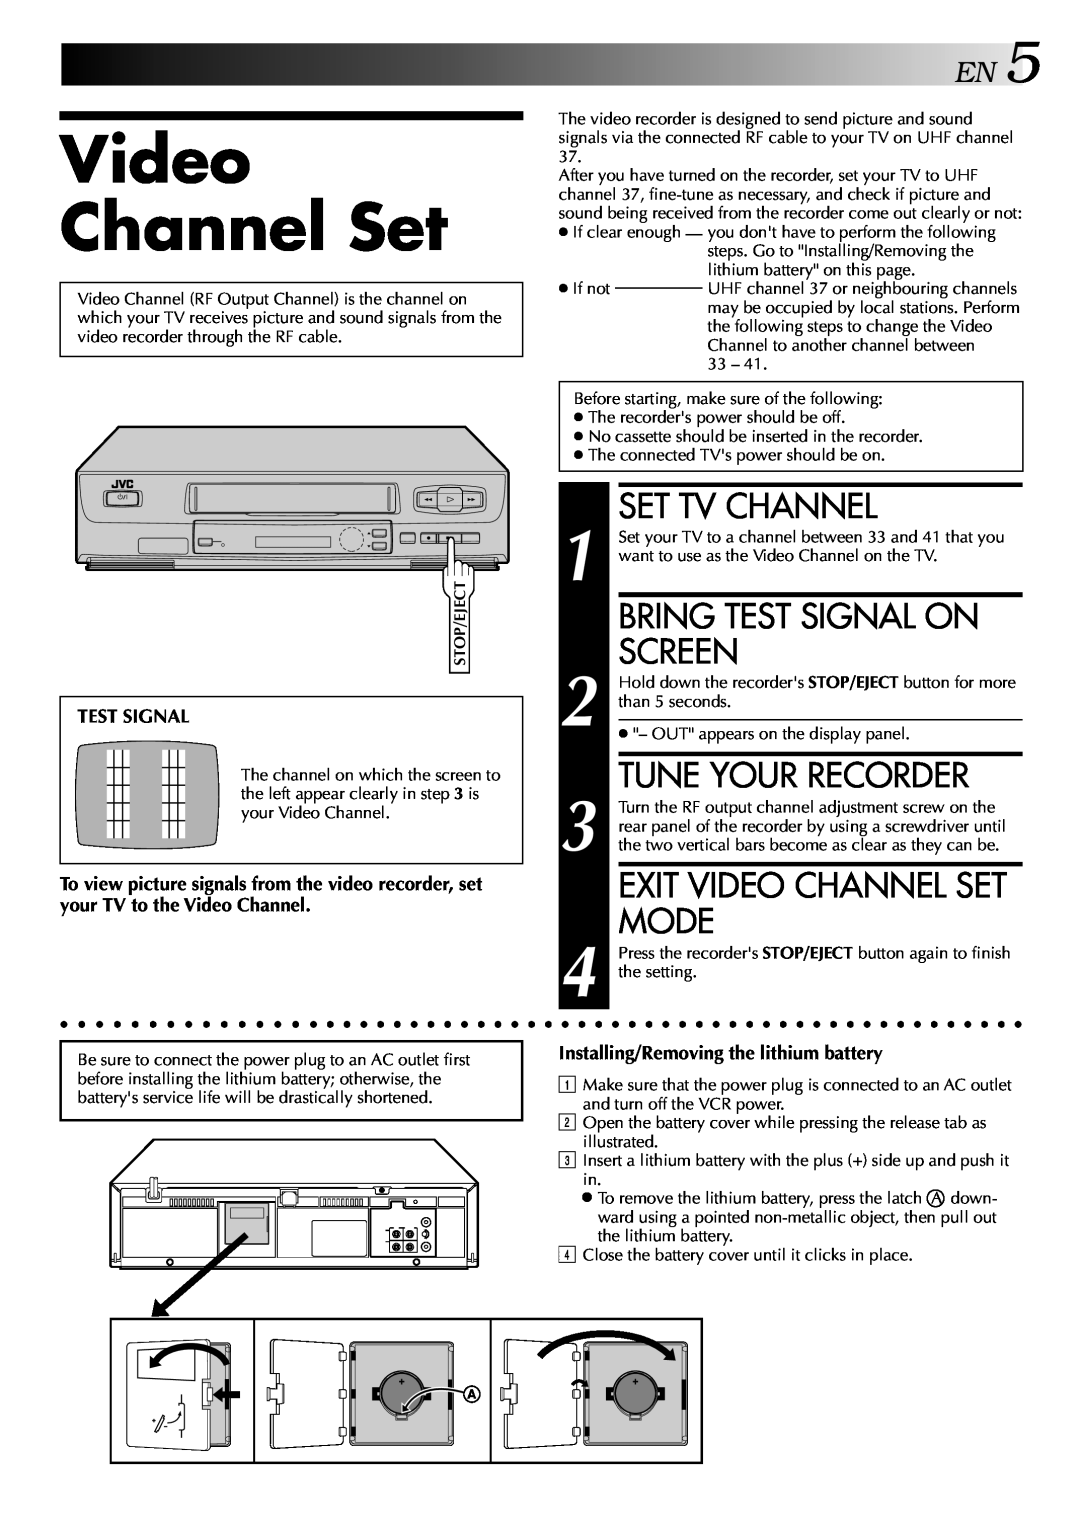 JVC HR-J245EA specifications Video Channel Set, Set Tv Channel, Bring Test Signal On, Screen, Tune Your Recorder, Mode 